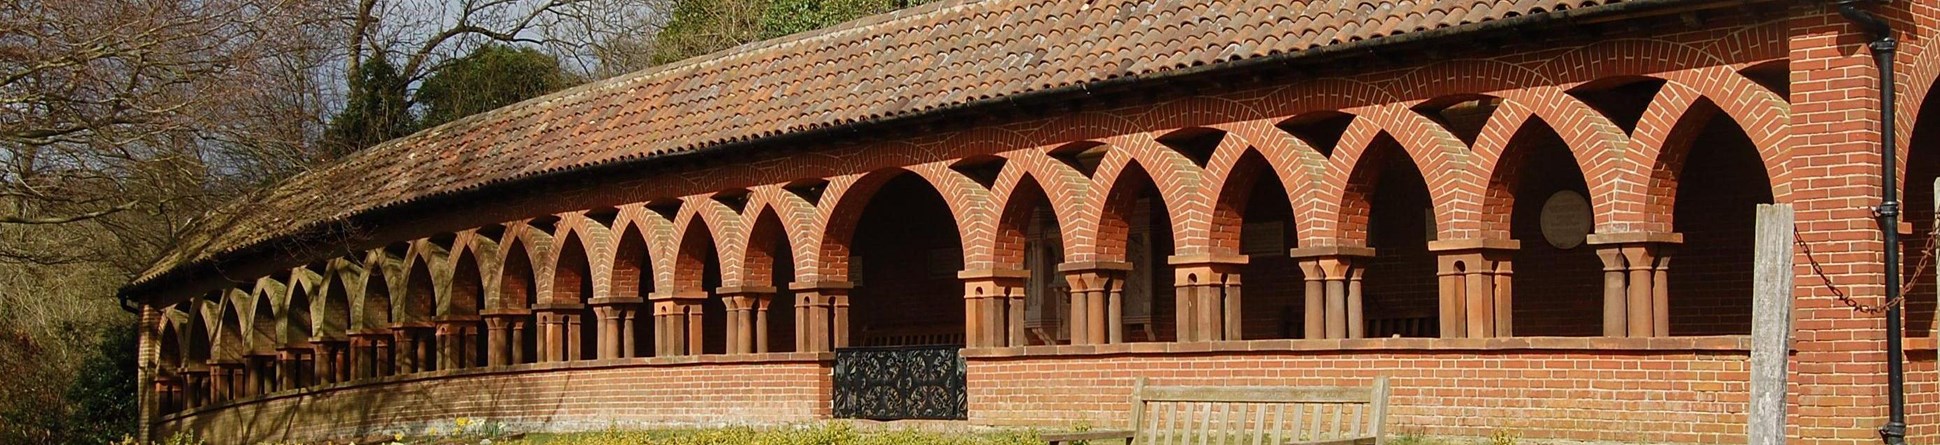 The Watts Memorial Cloister, Compton, Surrey designed and built in 1911 by Mary Seton Watts in Italianate style. Listed Grade II.